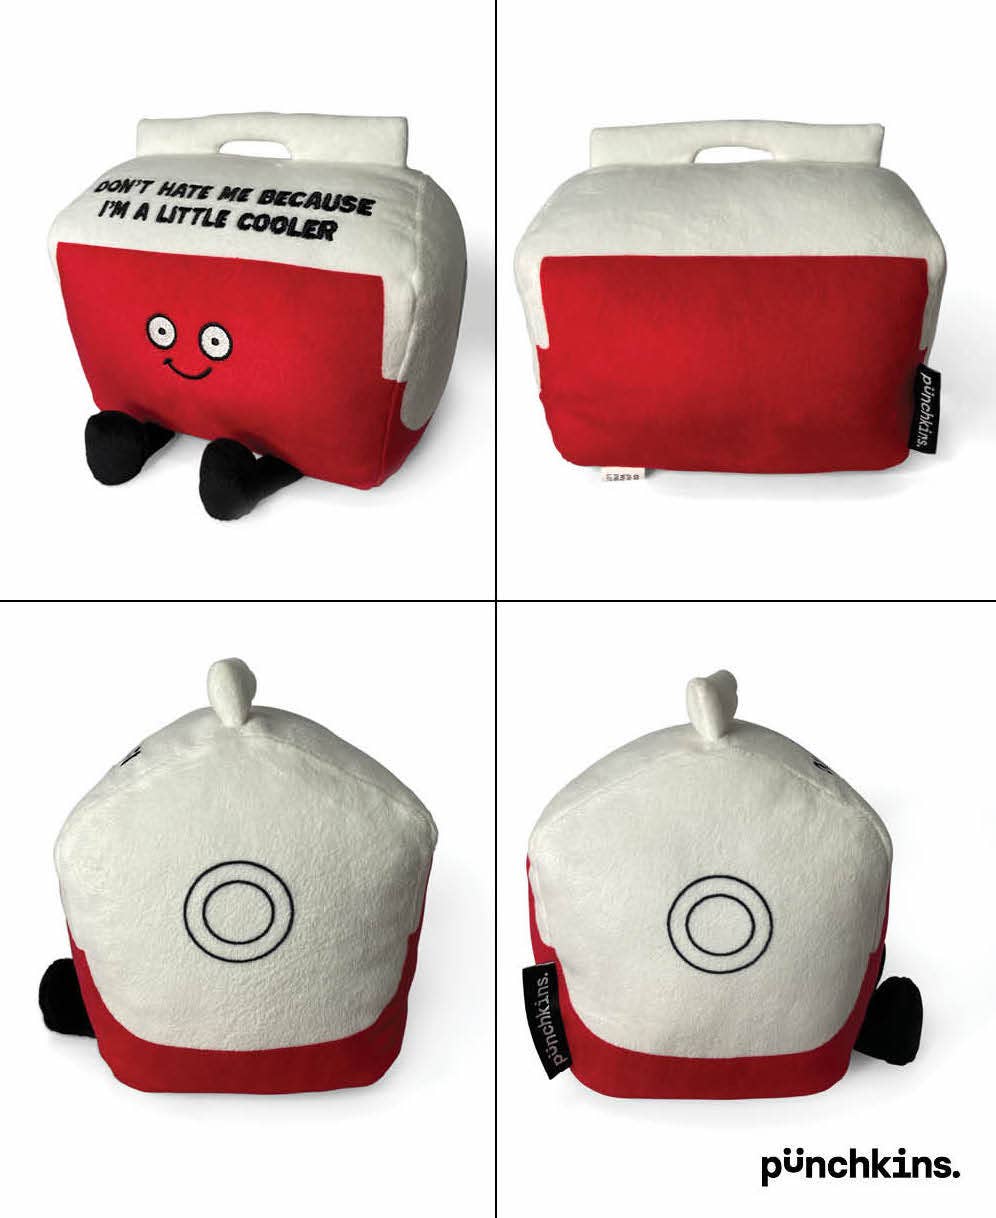 Punchkins Funny Cooler Plushie, Perfect Gift for Friends, Family, Work Kawaii Gifts 850042202340